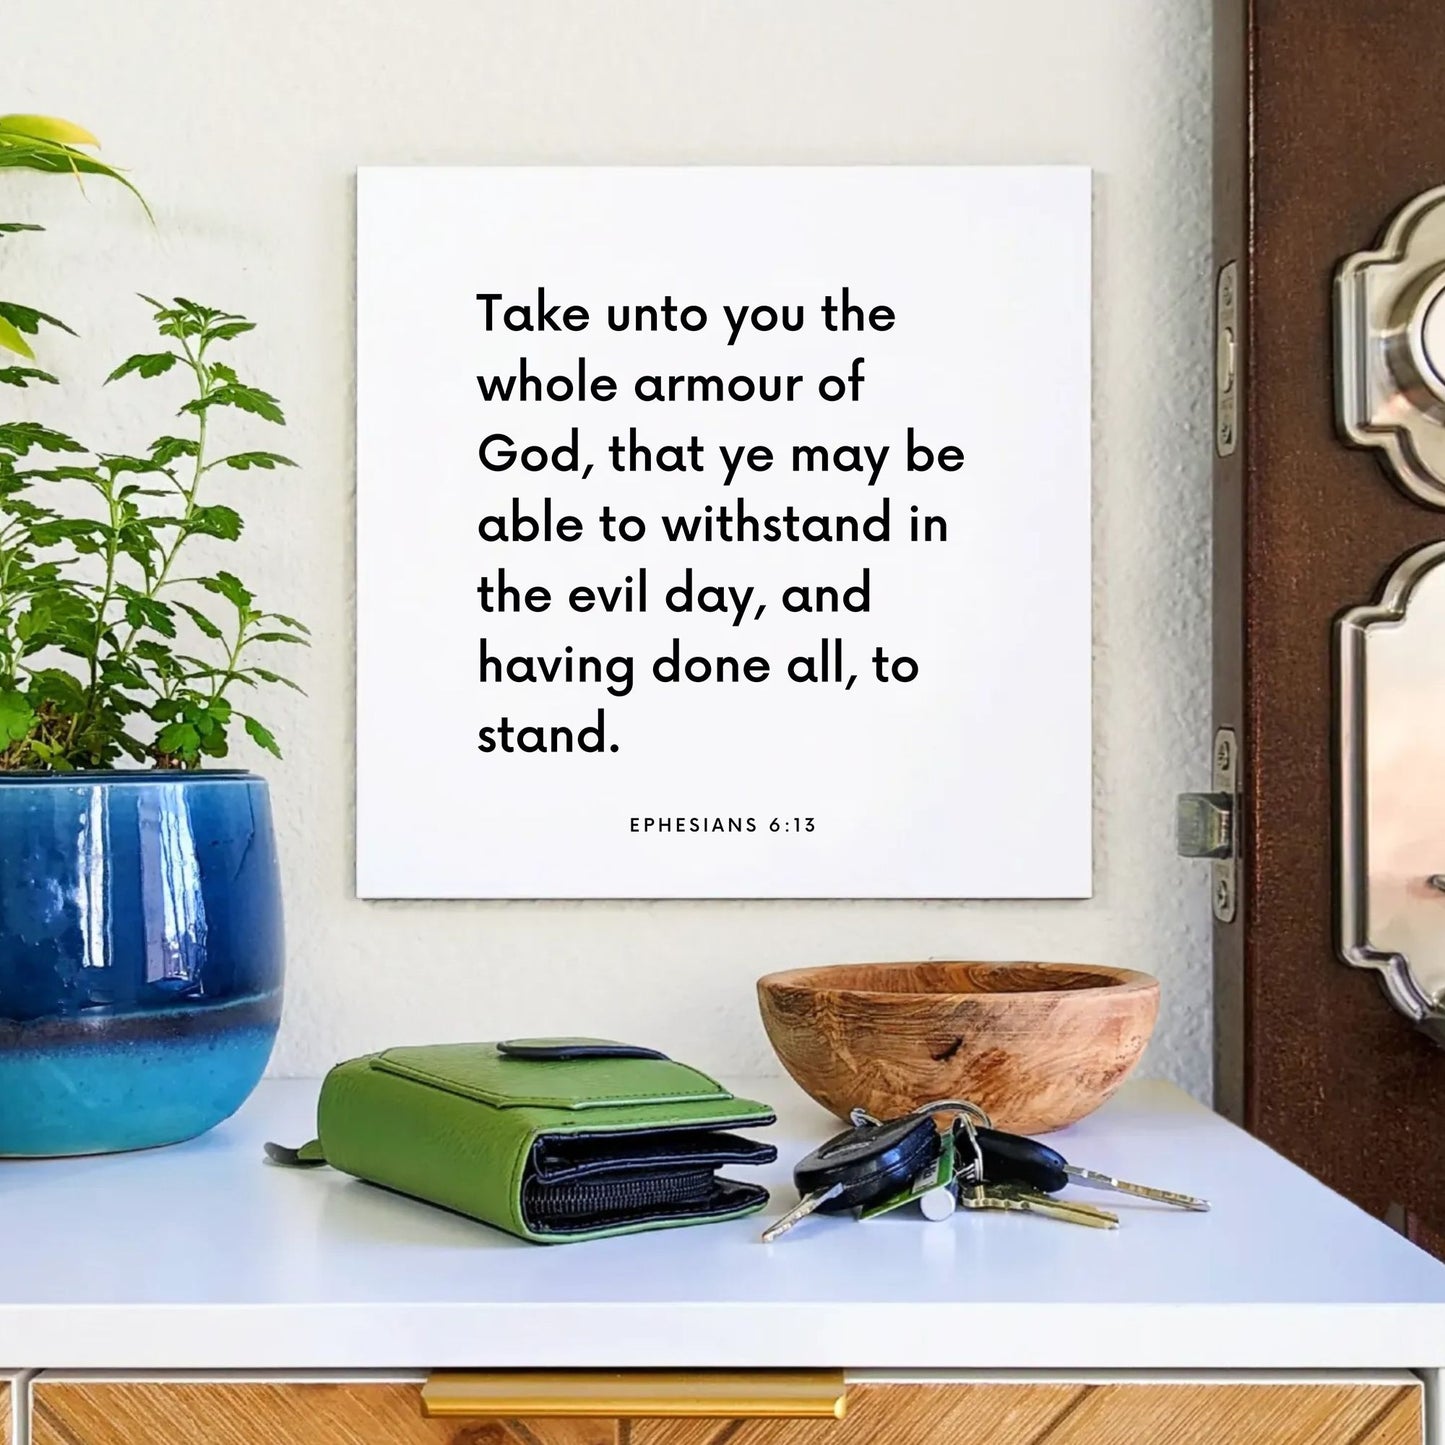 Entryway mouting of the scripture tile for Ephesians 6:13 - "Take unto you the whole armour of God"